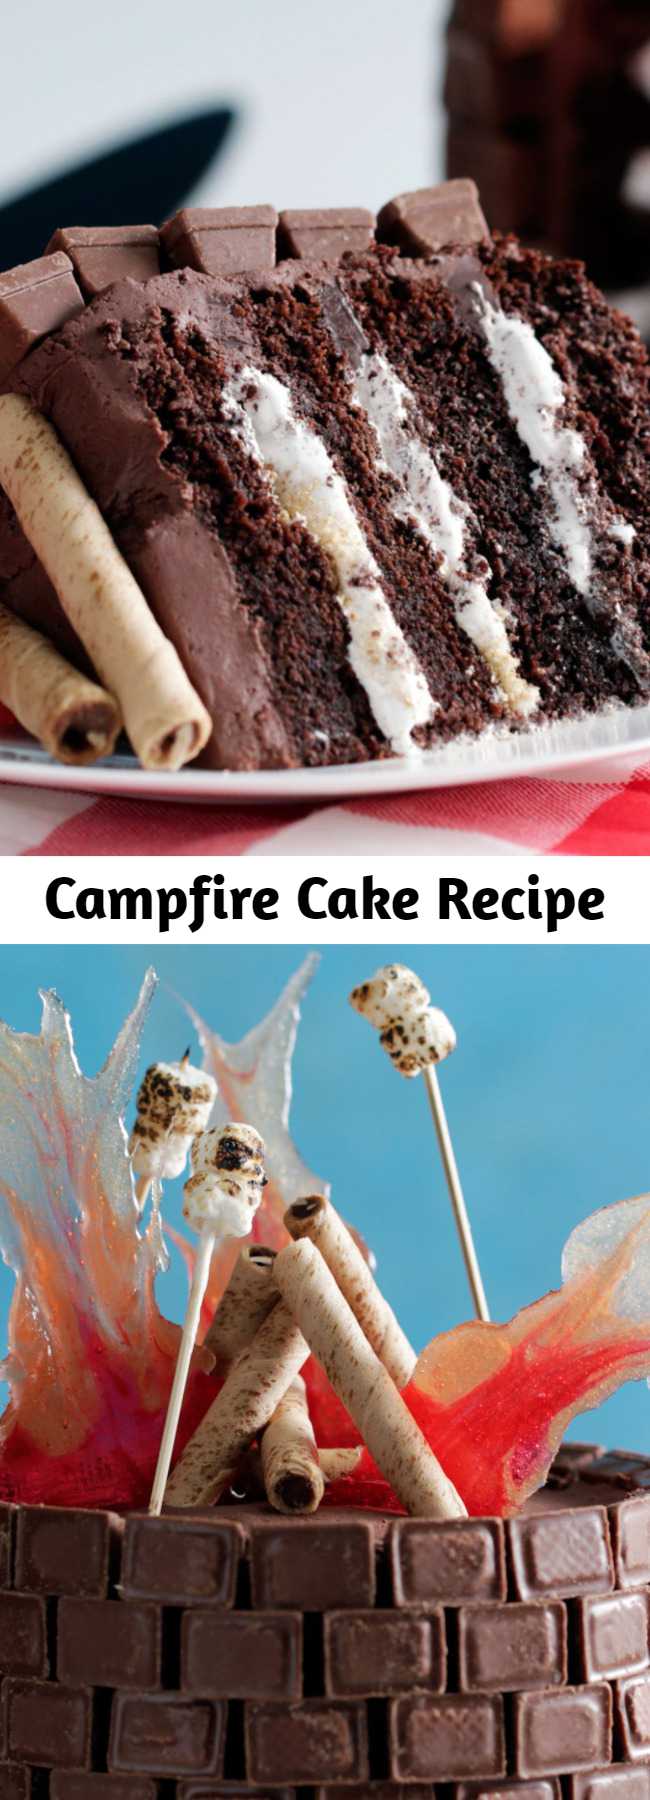 Campfire Cake Recipe - Here's the perfect birthday cake idea for a backyard party or camping party or for those outdoorsy types. This Campfire Cake recipe is sure to light up the birthday camper as well as the other party guests.